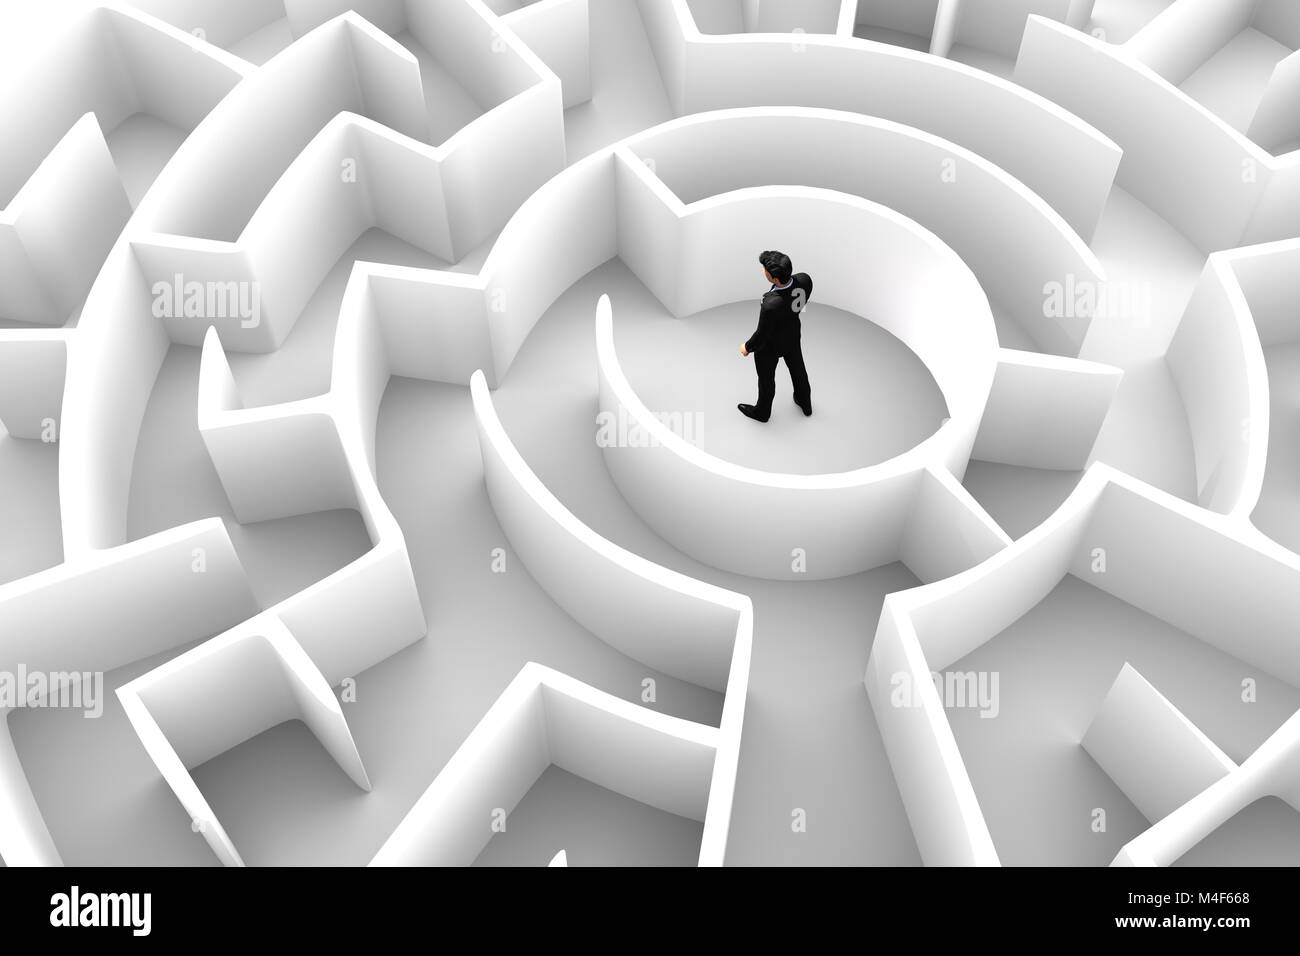 Businessman in the middle of the maze. Challenge concepts Stock Photo